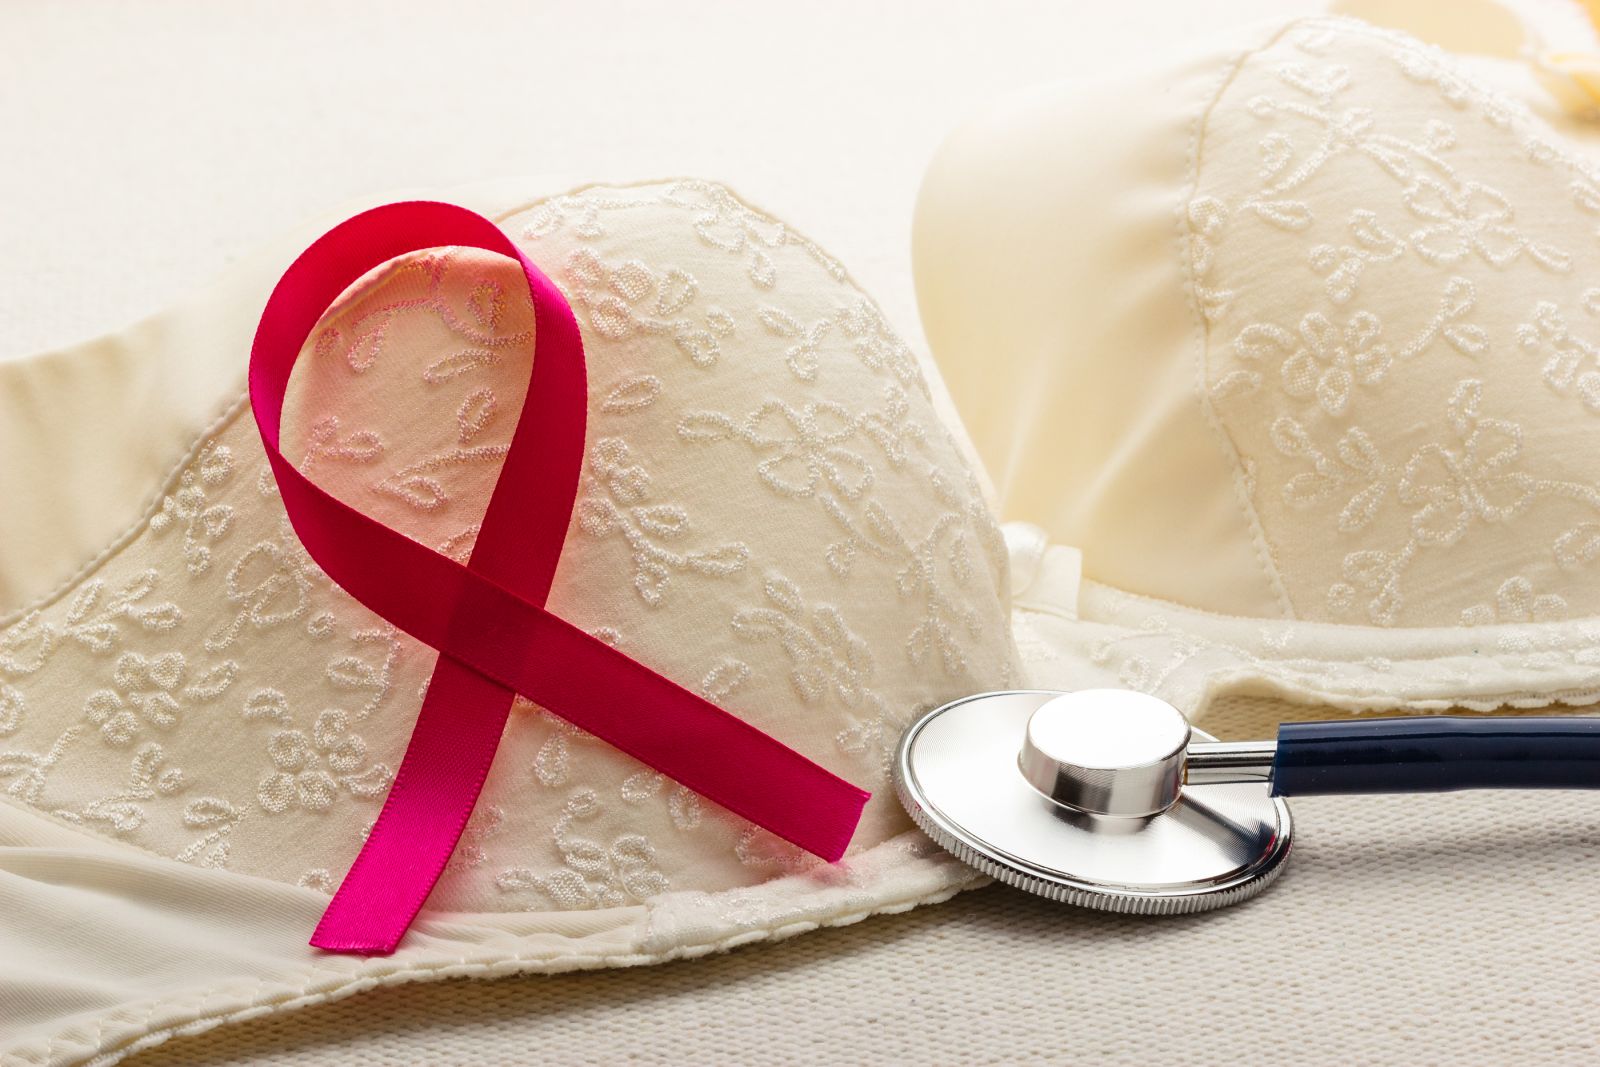 New Cases Of Cancer And Illness Linked To Breast Implants